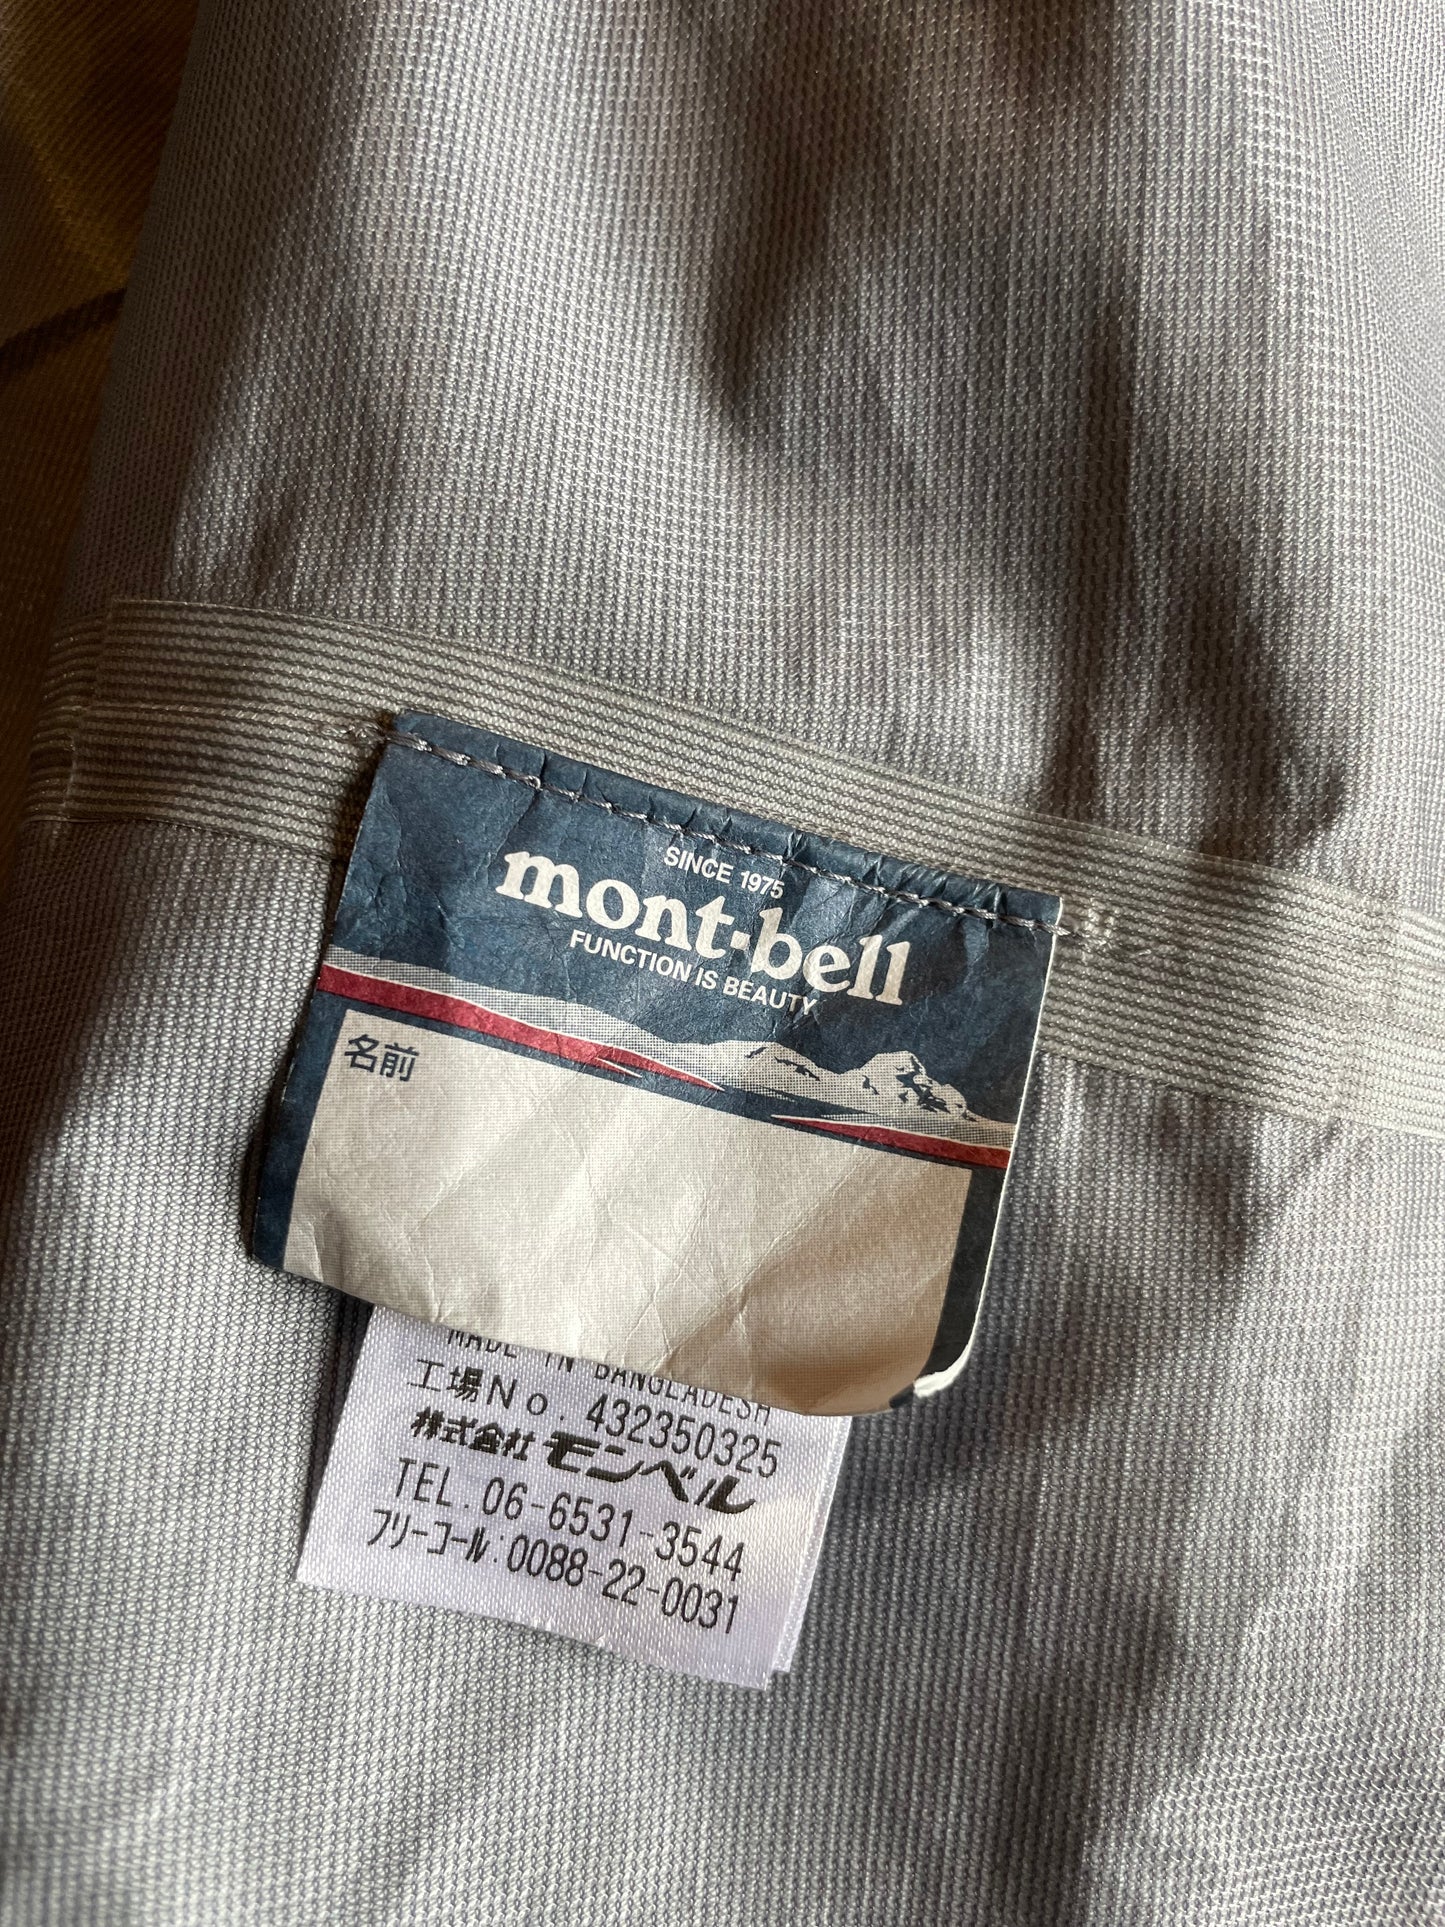 Montbell shell jacket (M)